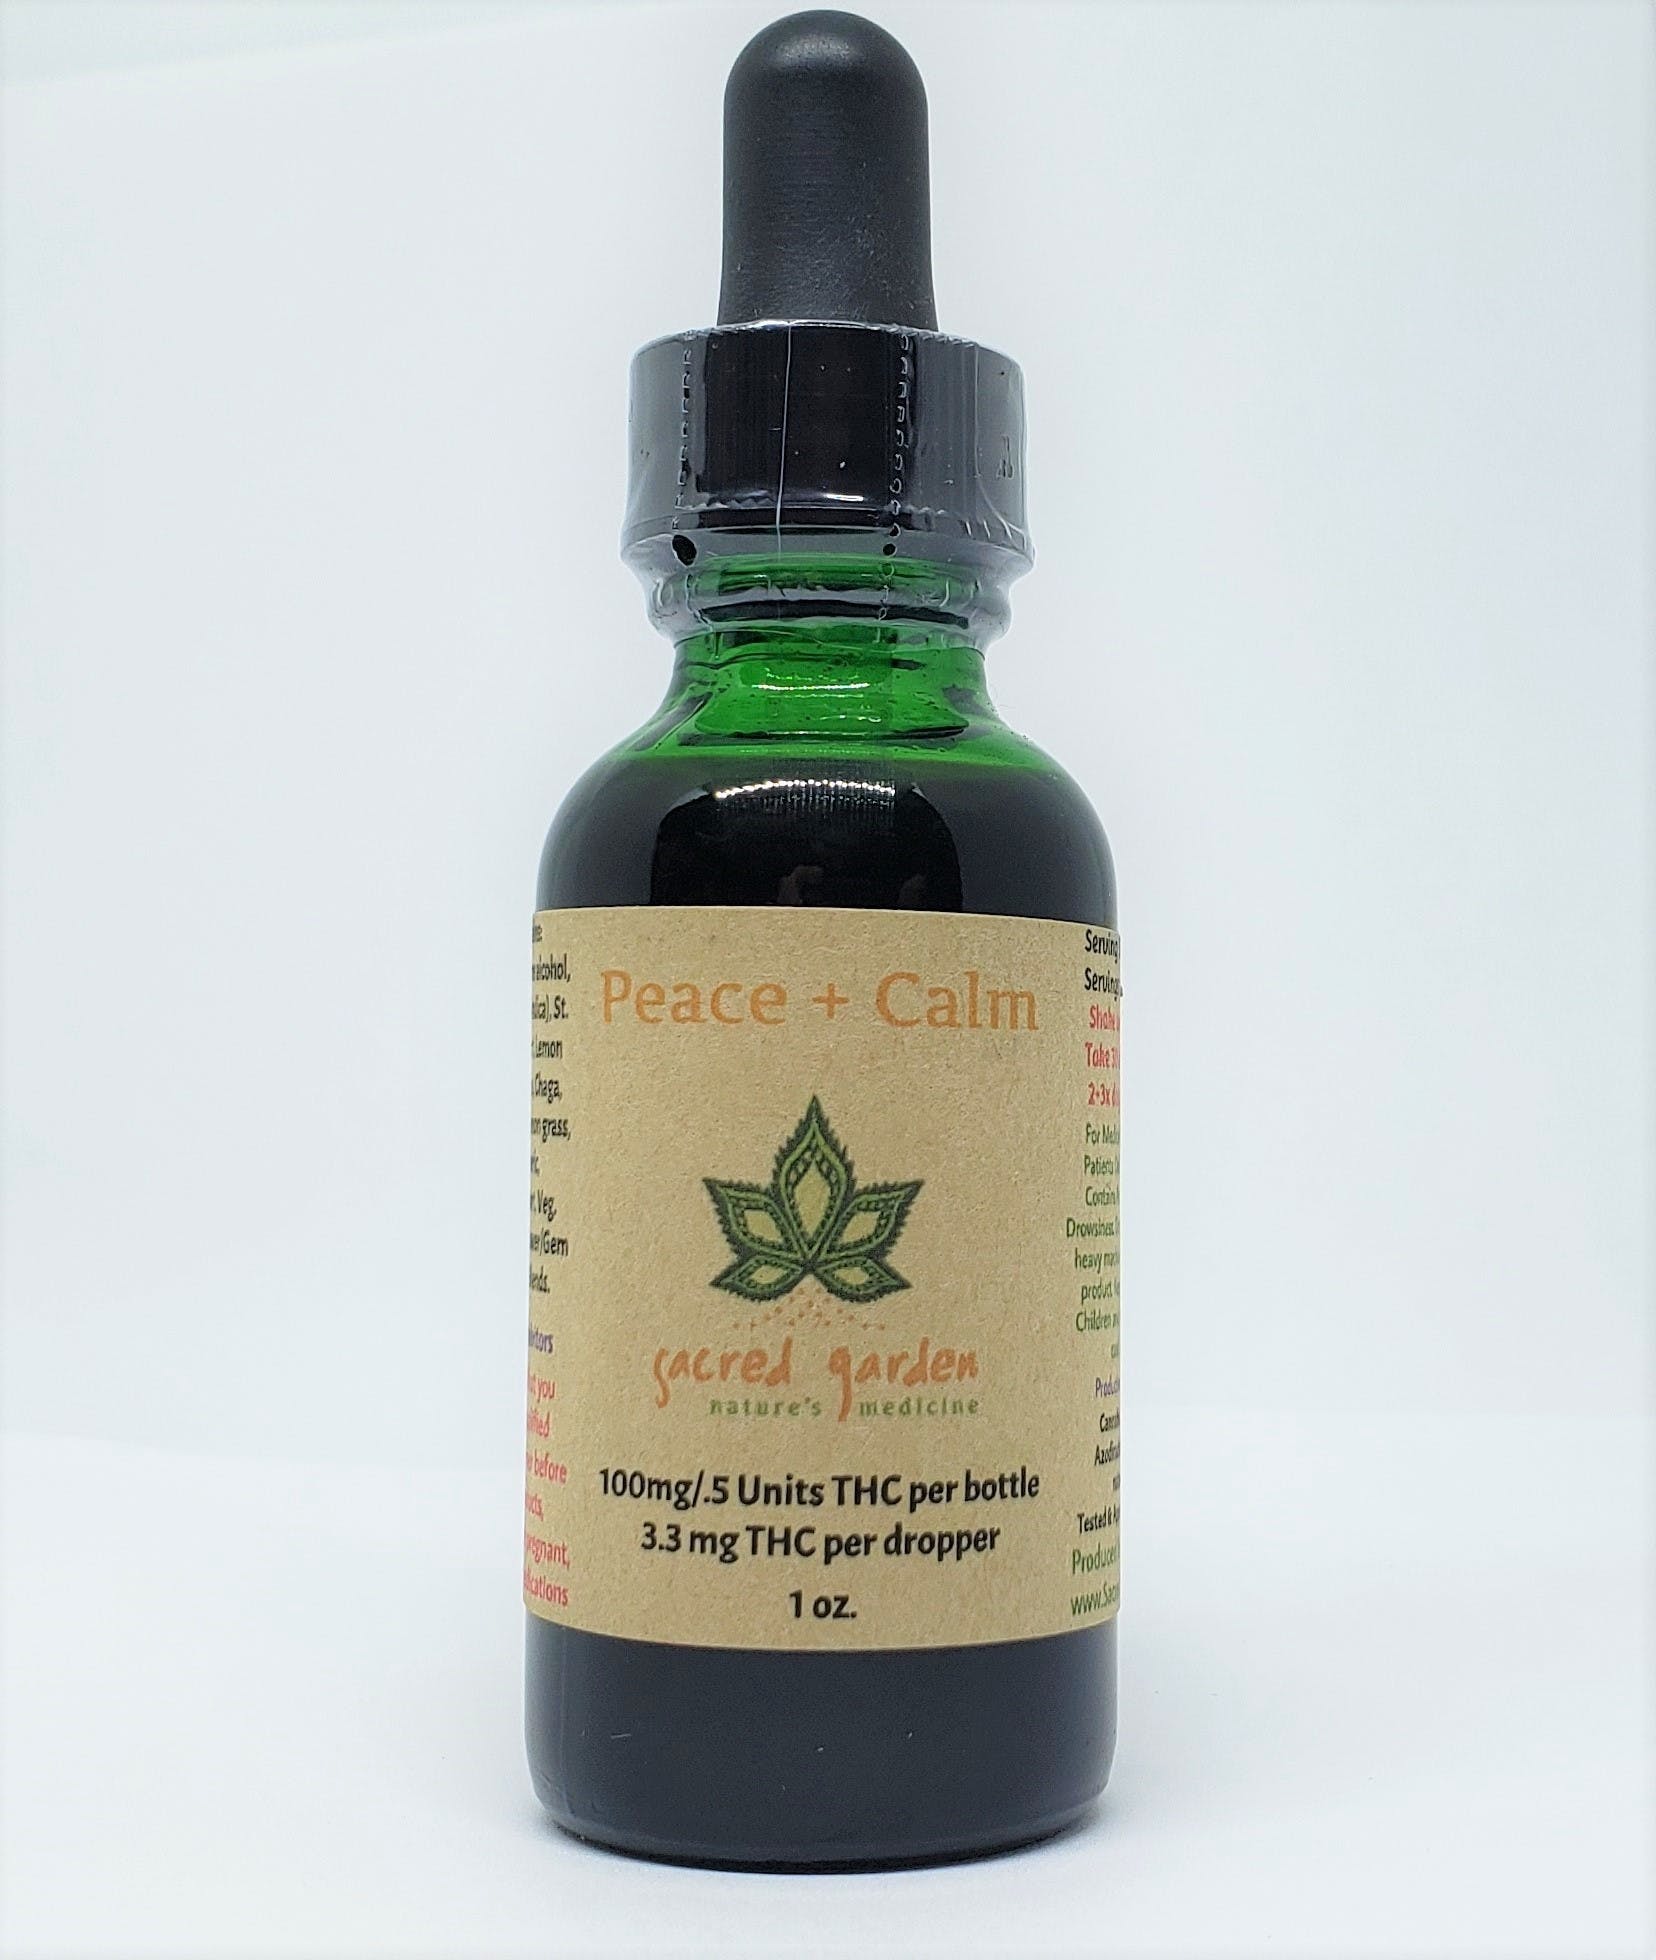 tincture-peace-and-calm-tincture-indica-1oz-100mg-thc